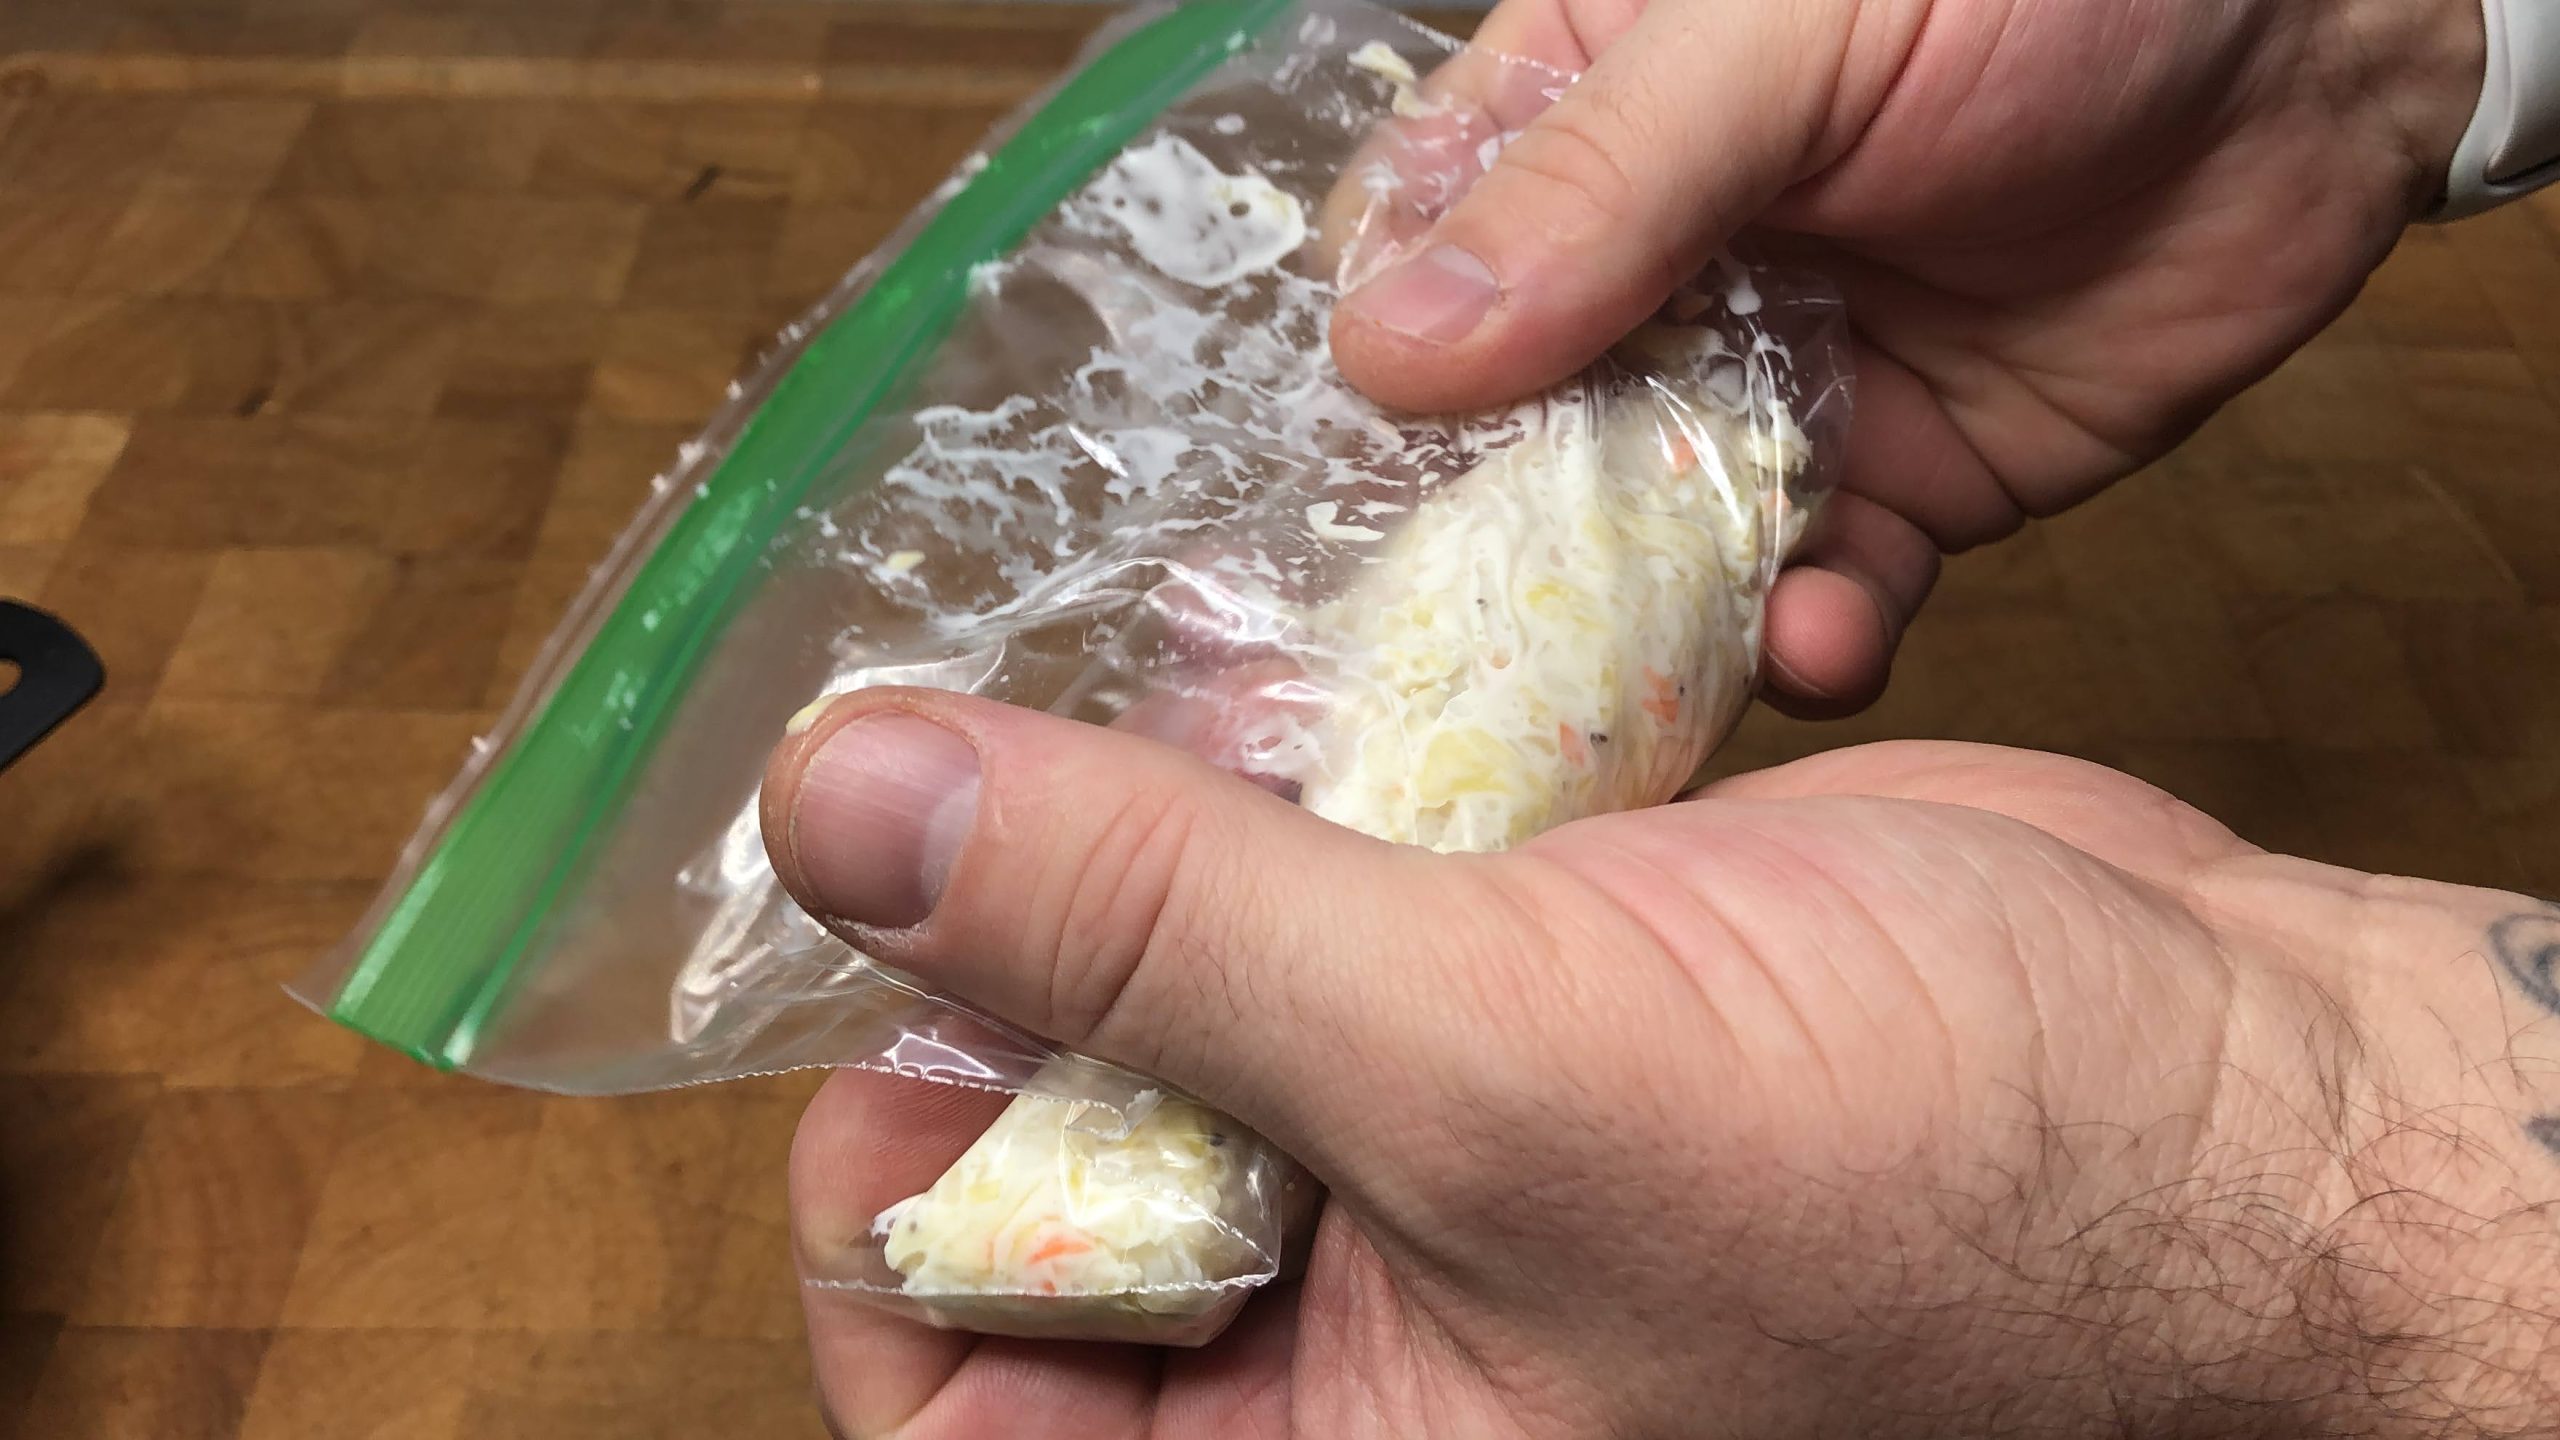 squeezing air out of a freezer bag filled with coleslaw